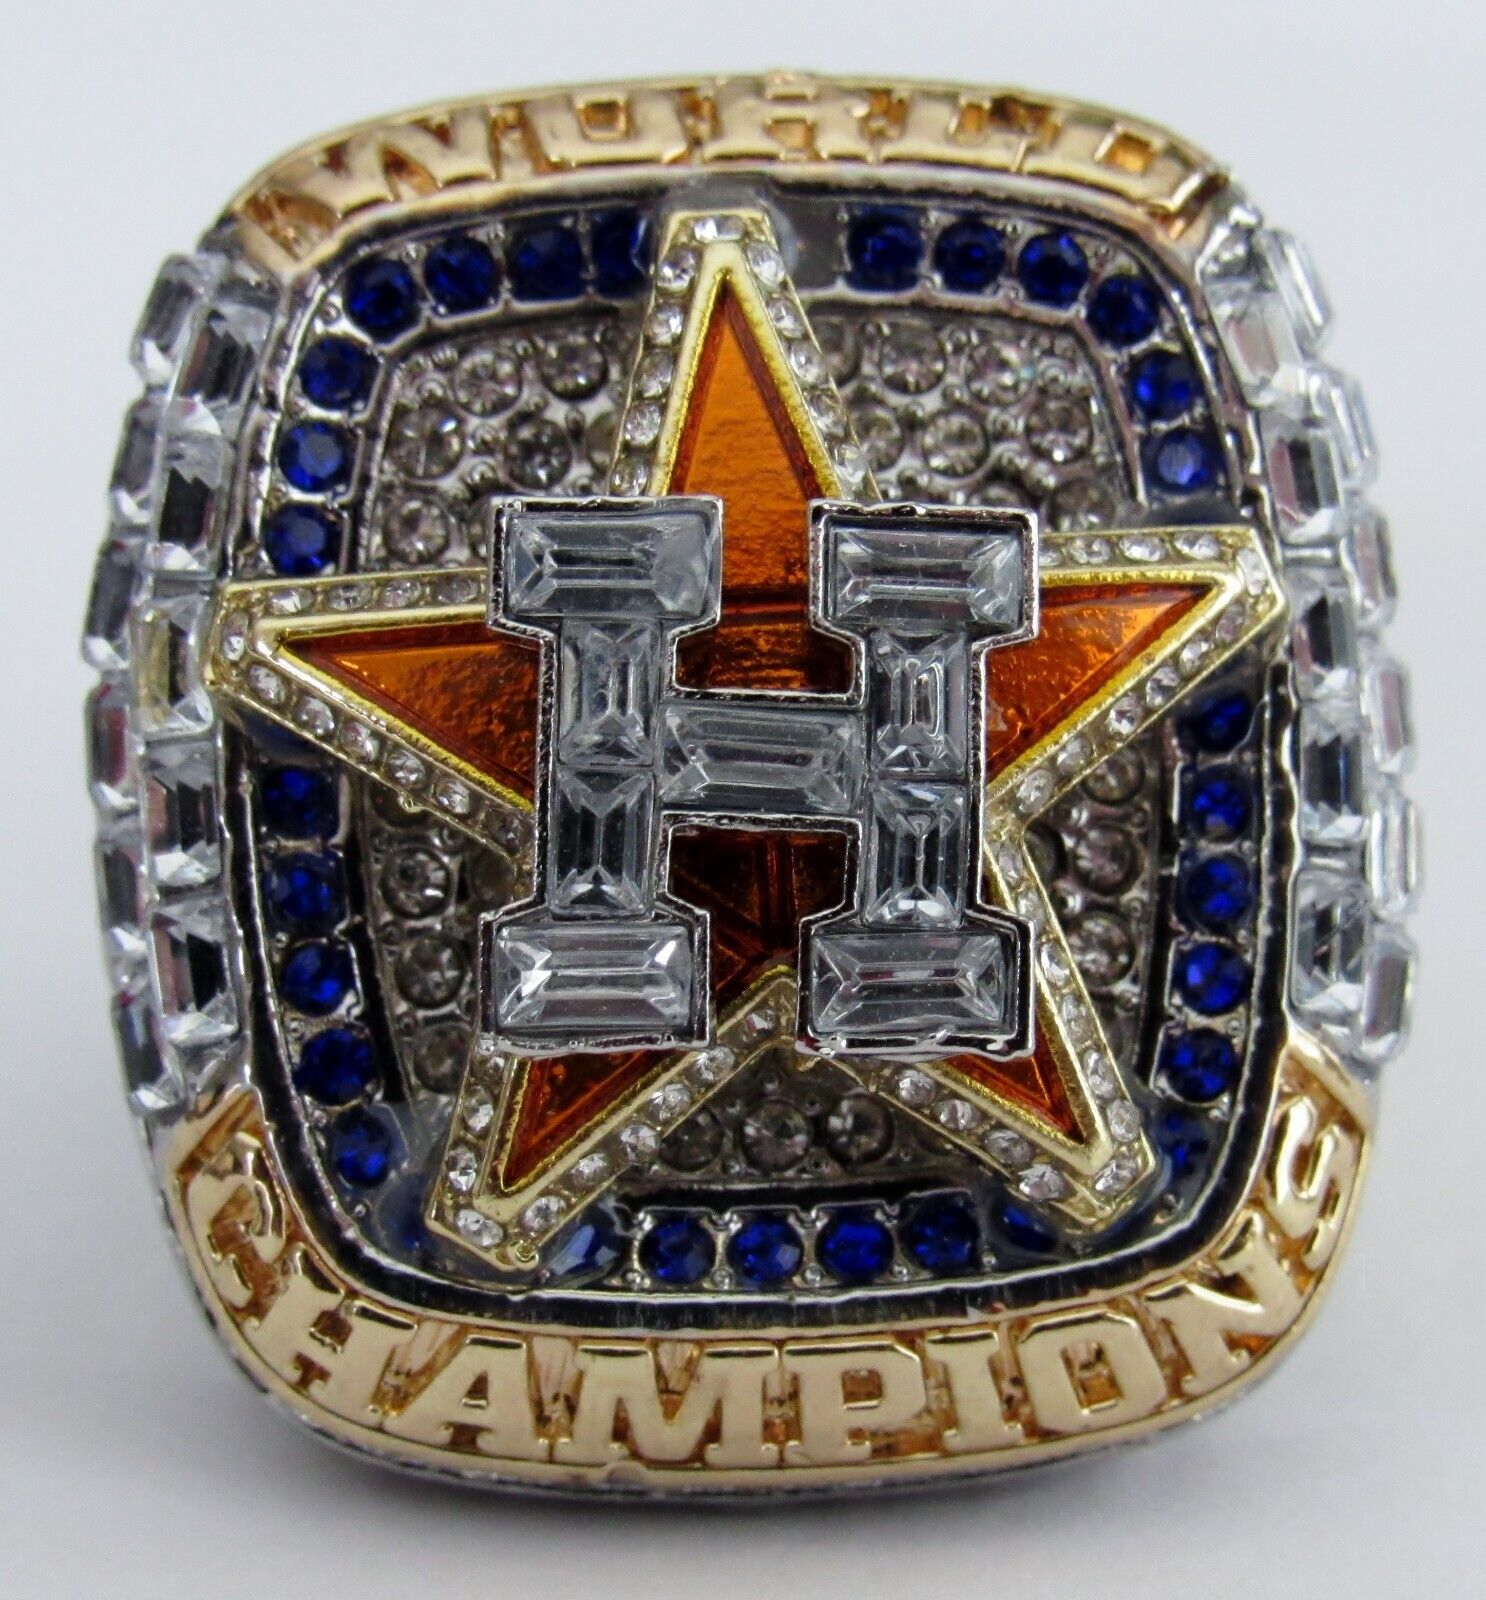 2022 Houston Astros World Series Championship Replica Rings 6 Different Players